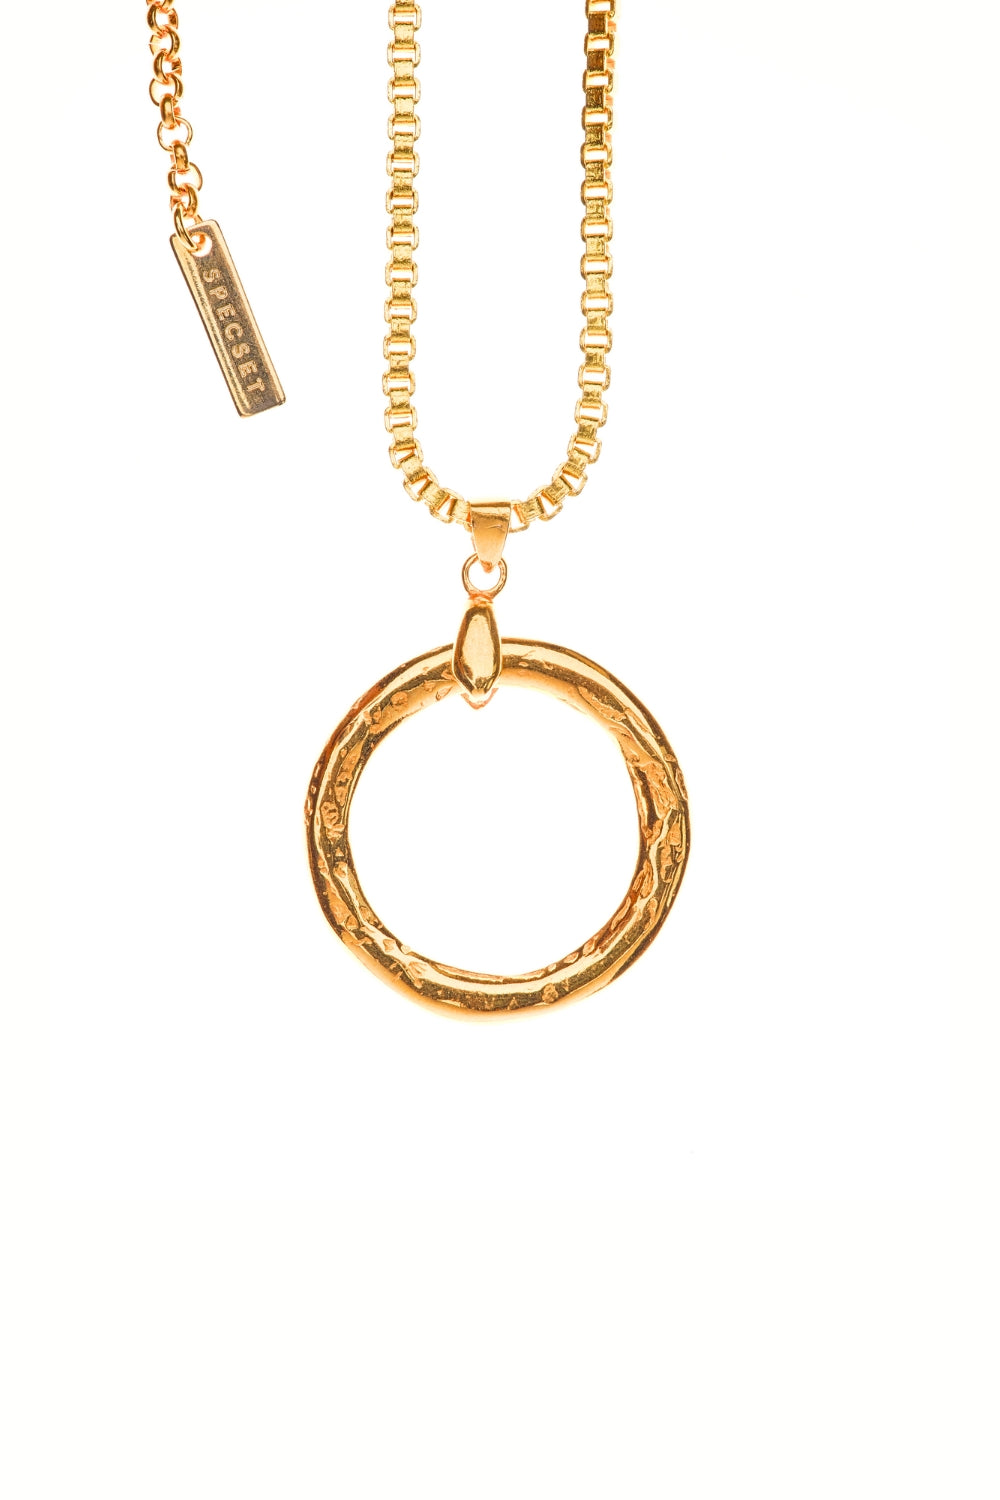 OUT OF BOX - GOLD Eyewear Necklace | SPECSET